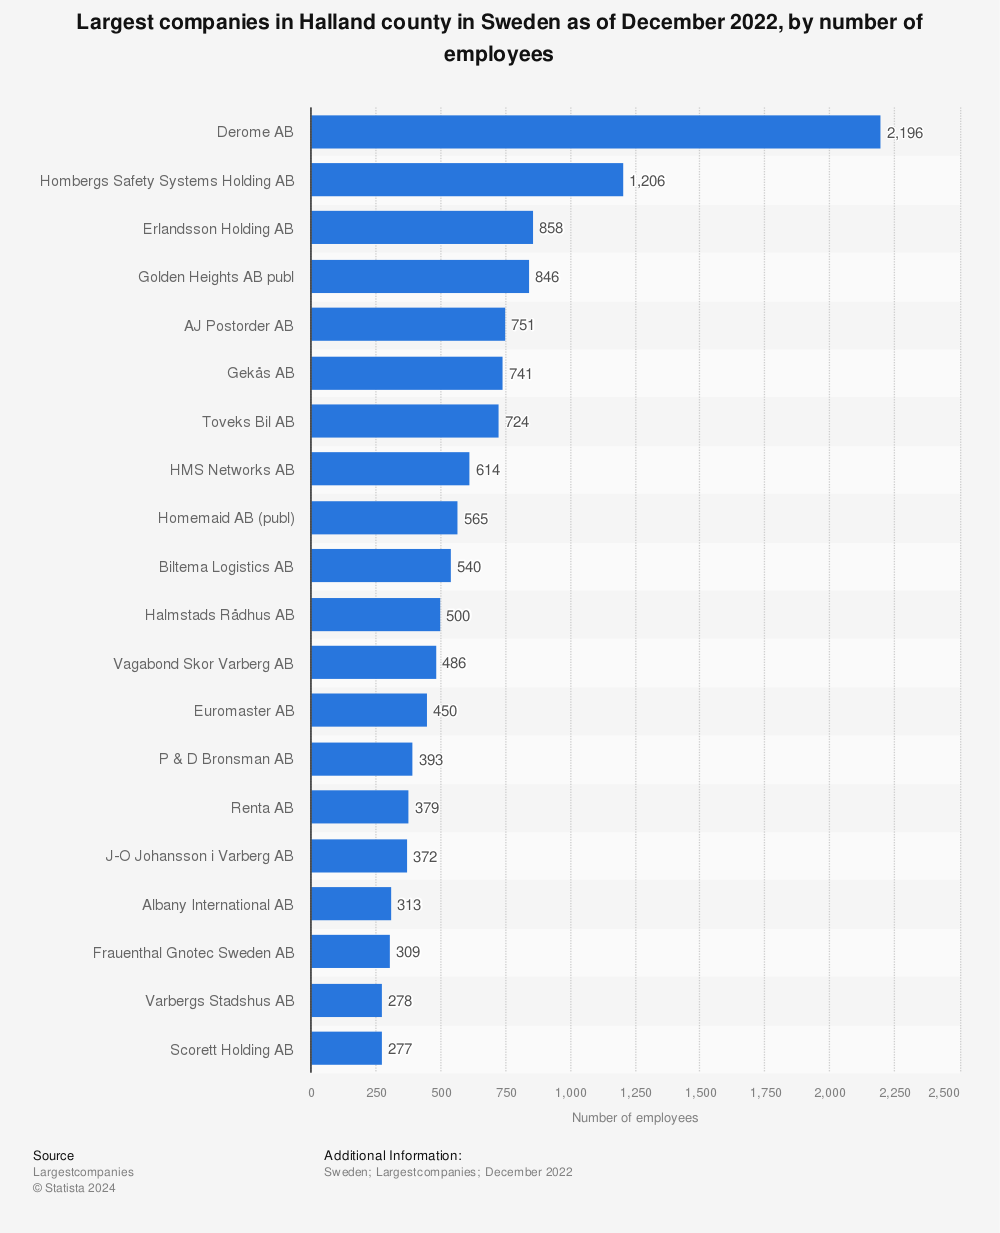 Statistic: Largest companies in Halland county in Sweden as of December 2022, by number of employees  | Statista